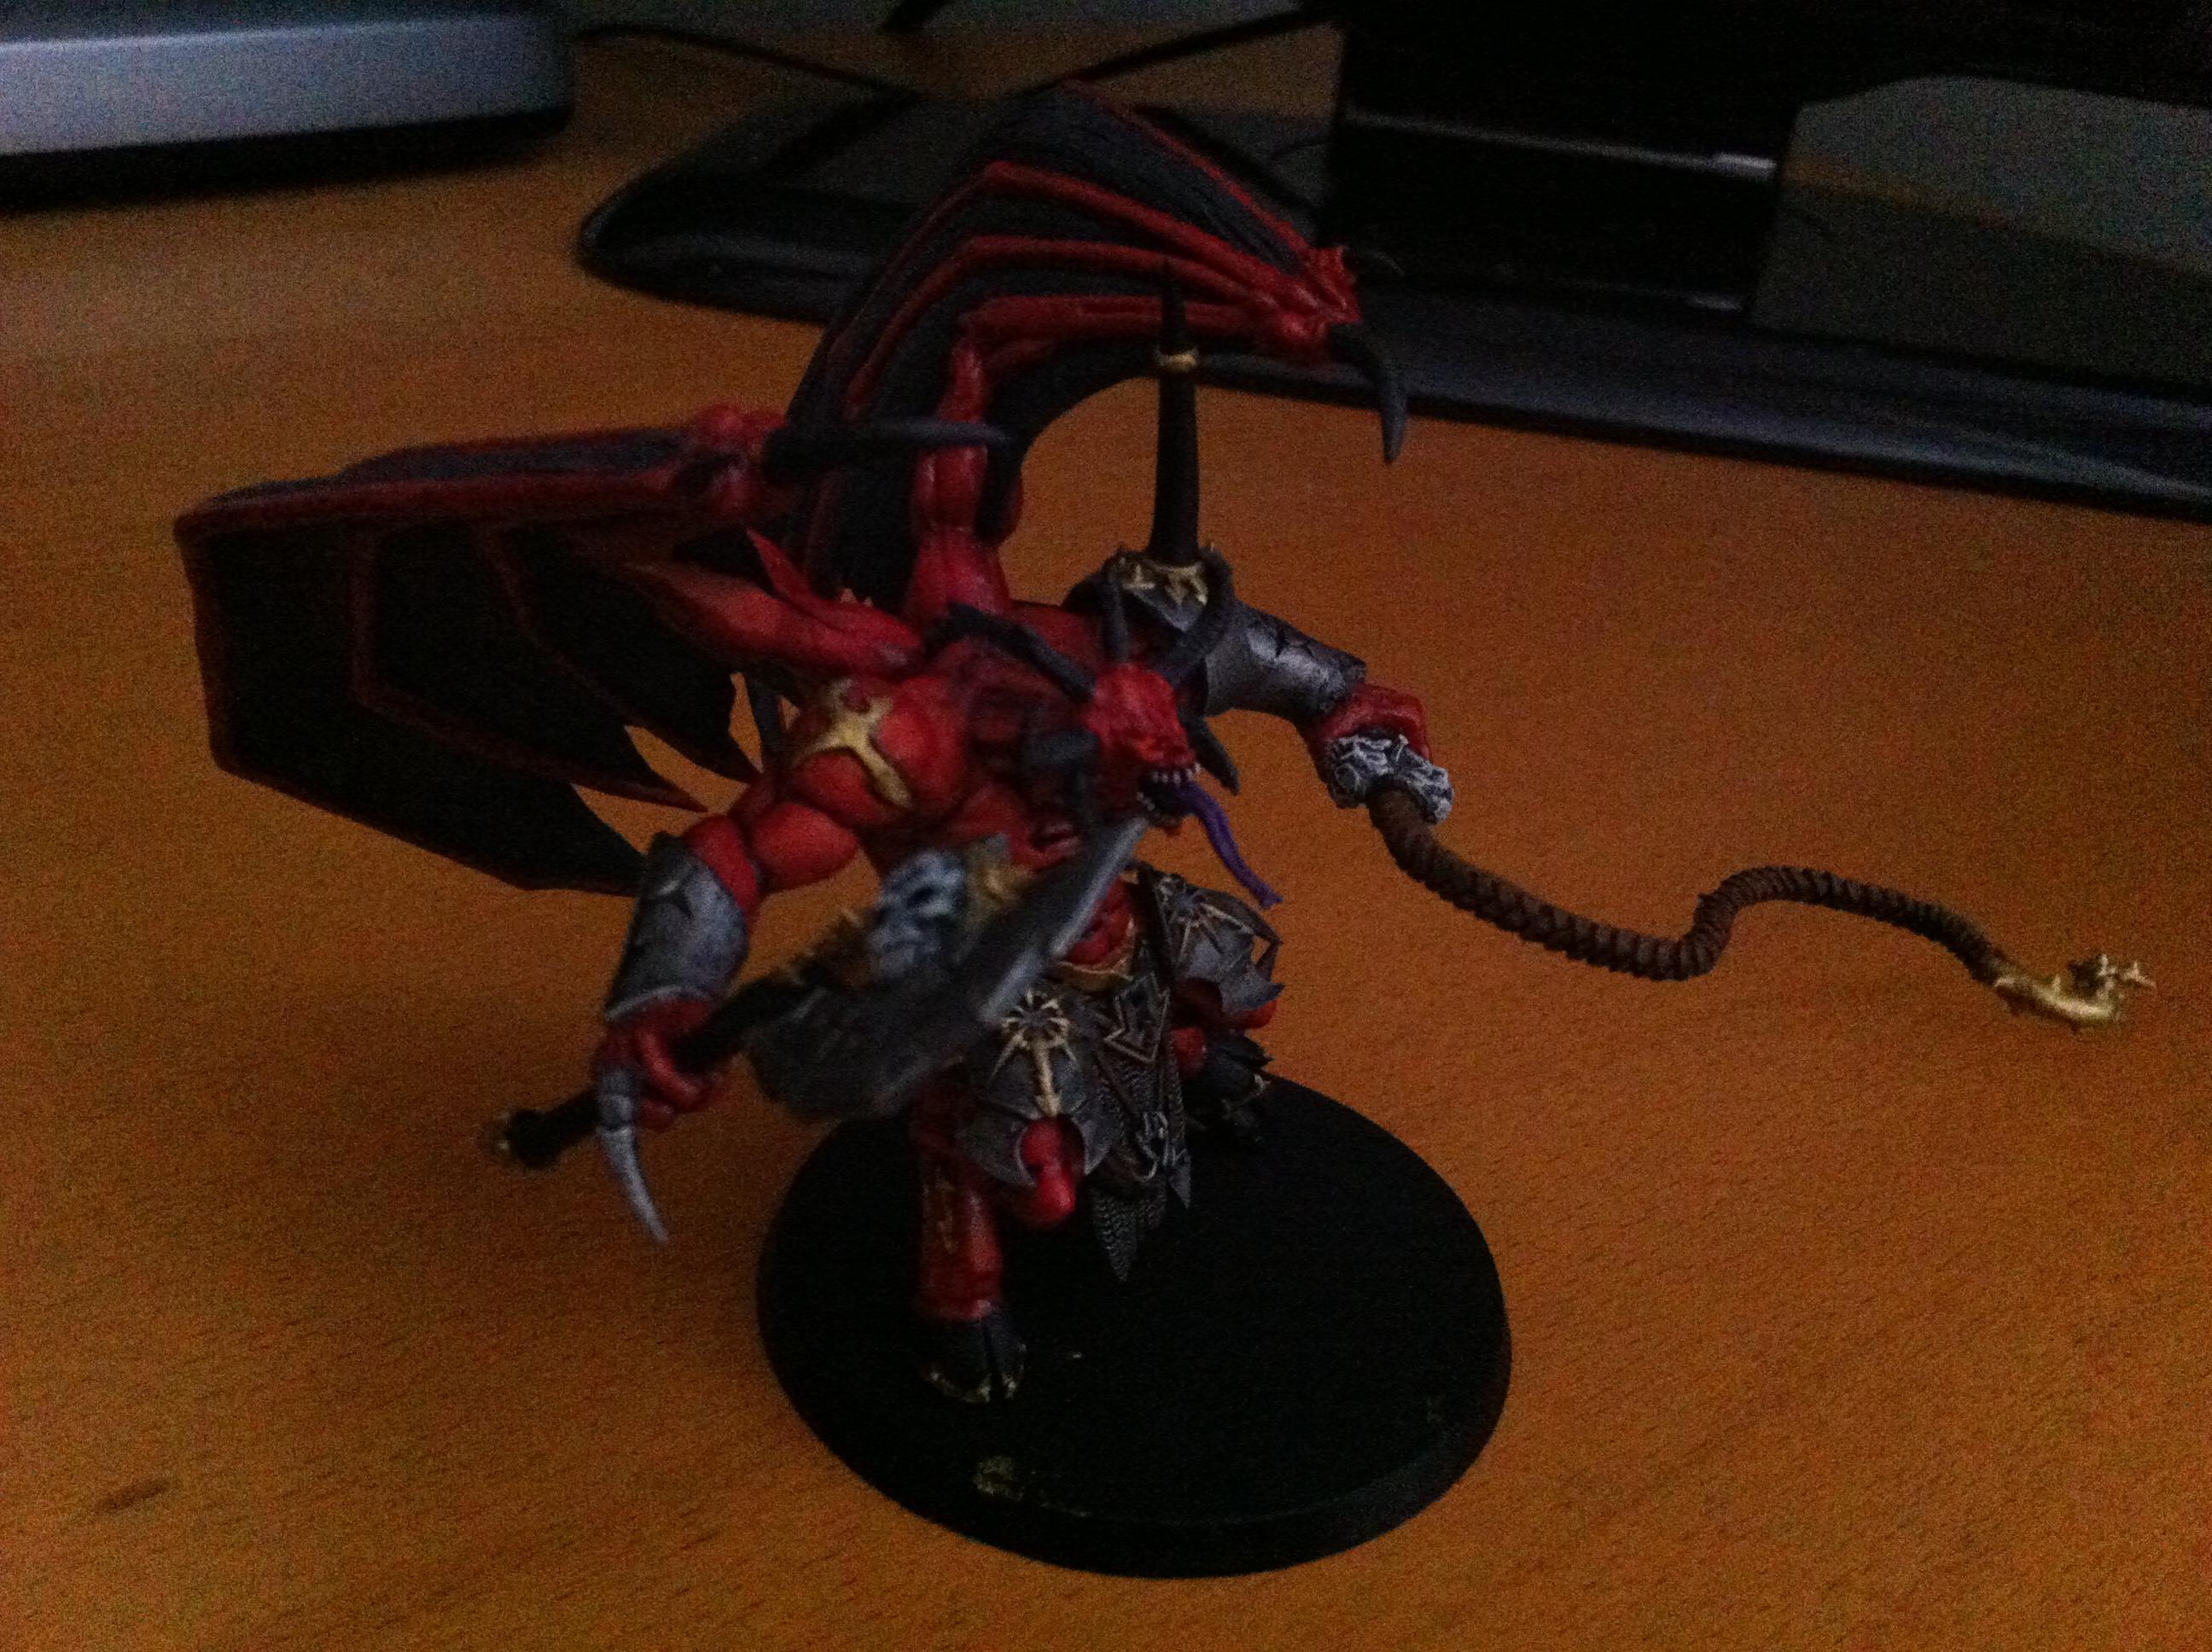 Another Bloodthirster pic